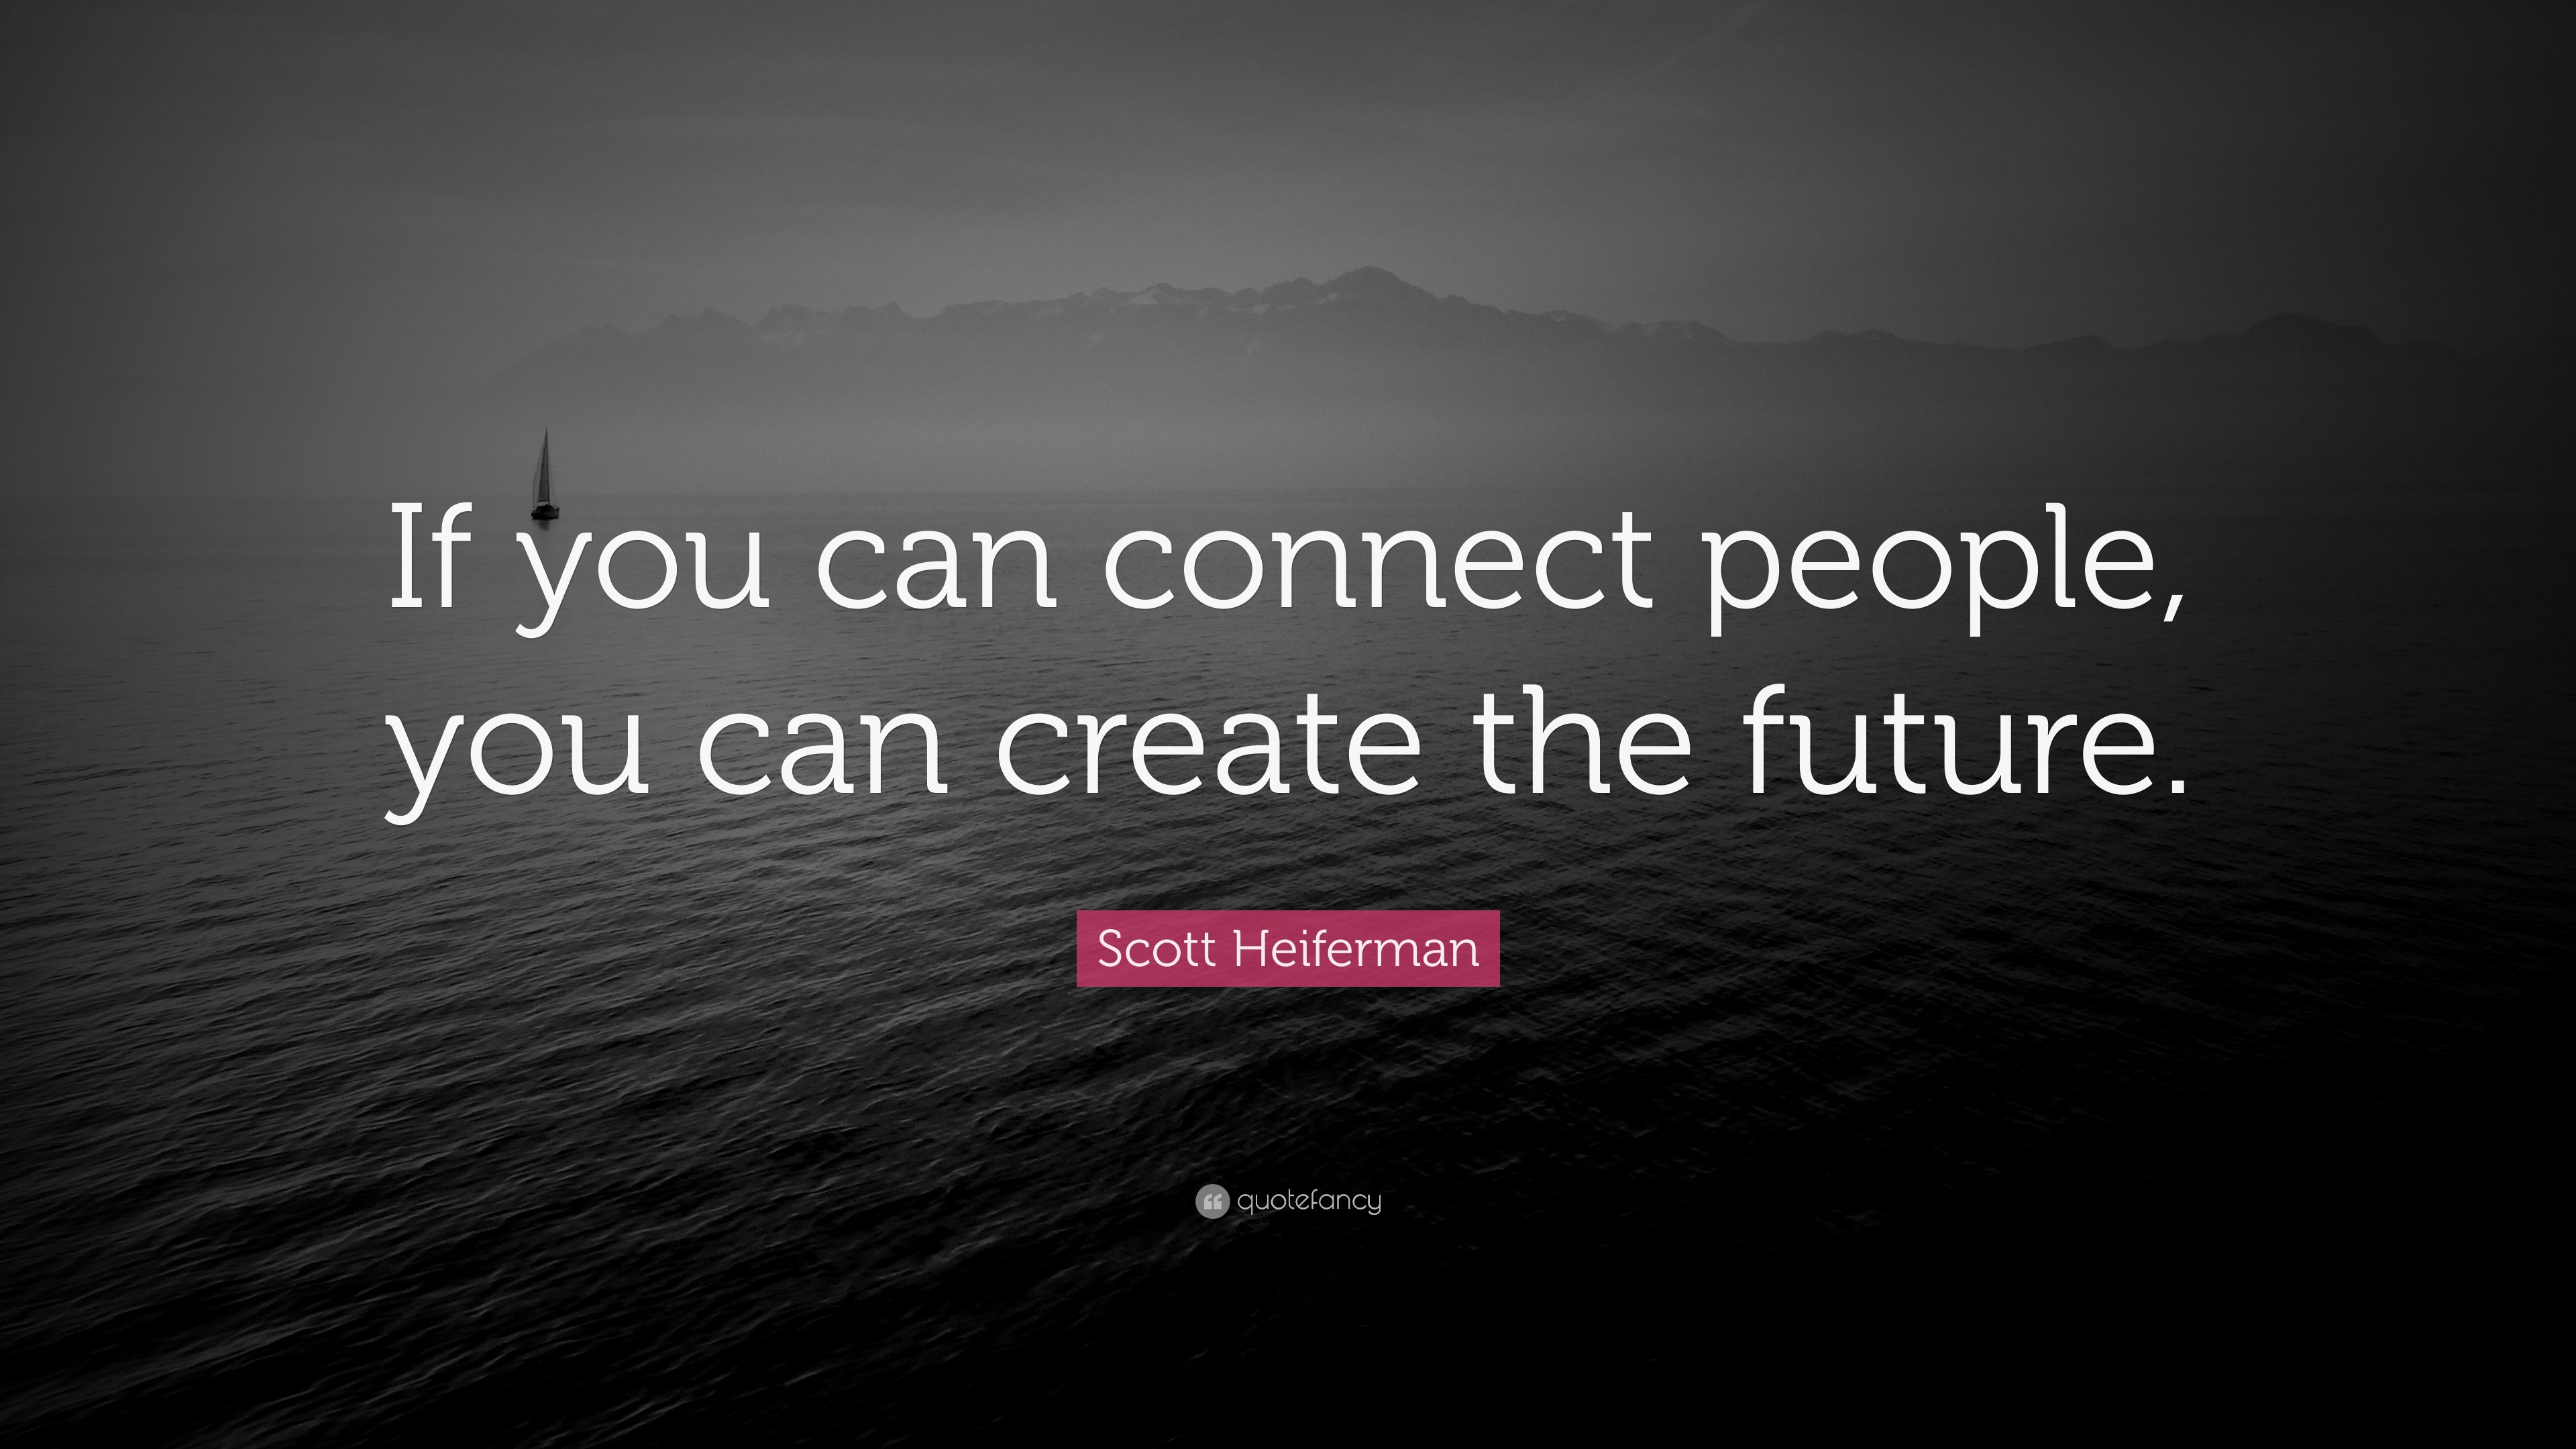 Scott Heiferman Quote “If you can connect people, you can